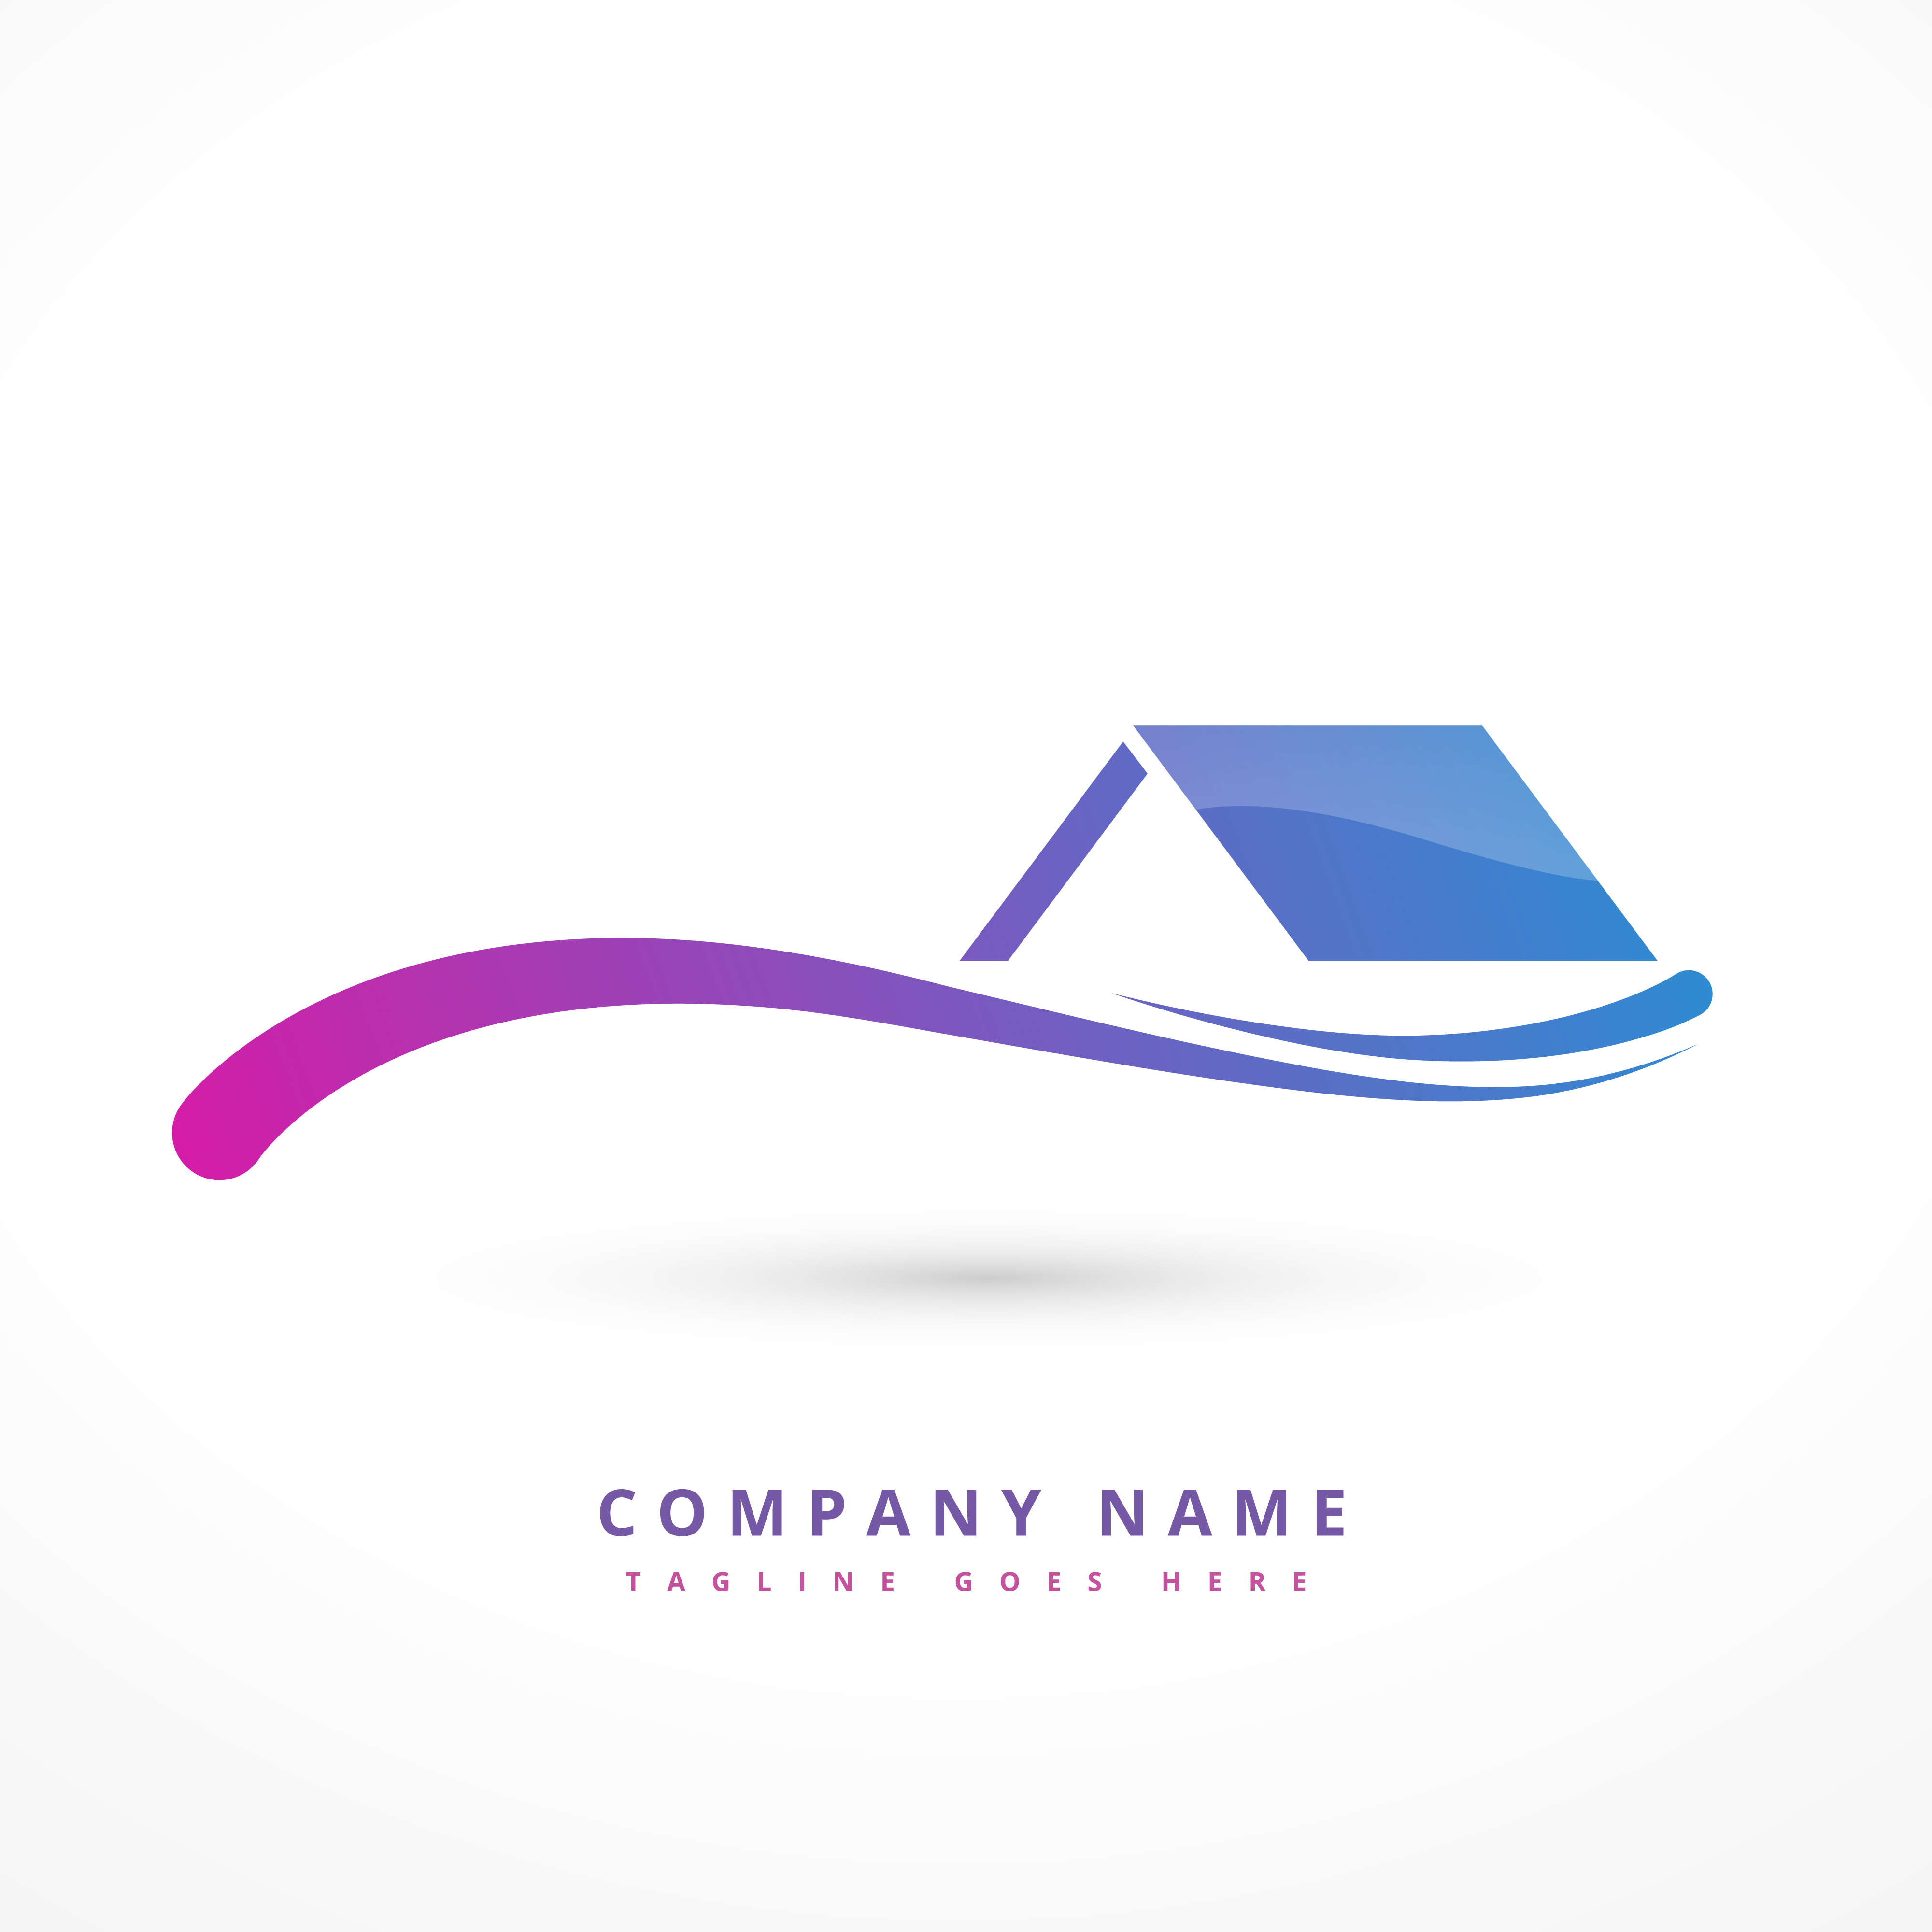 house or home company logo design illustration - Download Free Vector